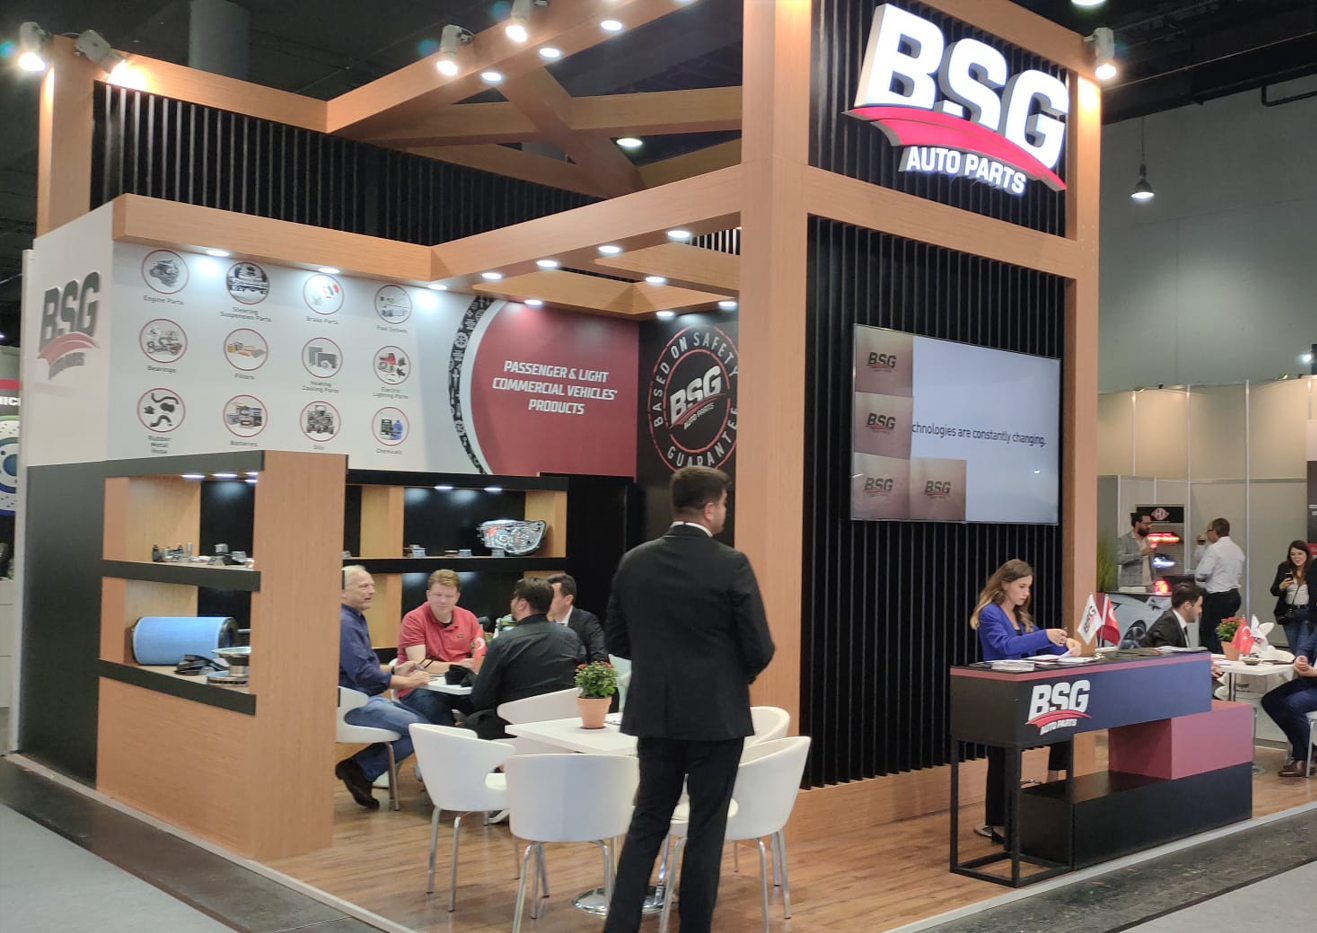 <p>20.09.2022</p>

<p>Representing the entire value chain of the automotive aftermarket, Frankfurt Automechanika was held in Main between 13 - 17 September. BSG Auto Parts took its place at the booth numbered G78 at the fair, where 78,000 visitors from 175 countries achieved a visitor satisfaction level of 92%.</p>

<p>BSG Auto Parts, which has come from the past to the present without compromising its sense of trust, and today delivers services to 94 countries, continues its quarter-century journey with the promise of 'Full Guarantee and Trust' to its customers. BSG Auto Parts, which hosted large groups of guests and developed cooperation with its new visitors during the fair, is preparing to host its guests at Frankfurt Automechanika in 2024.</p>